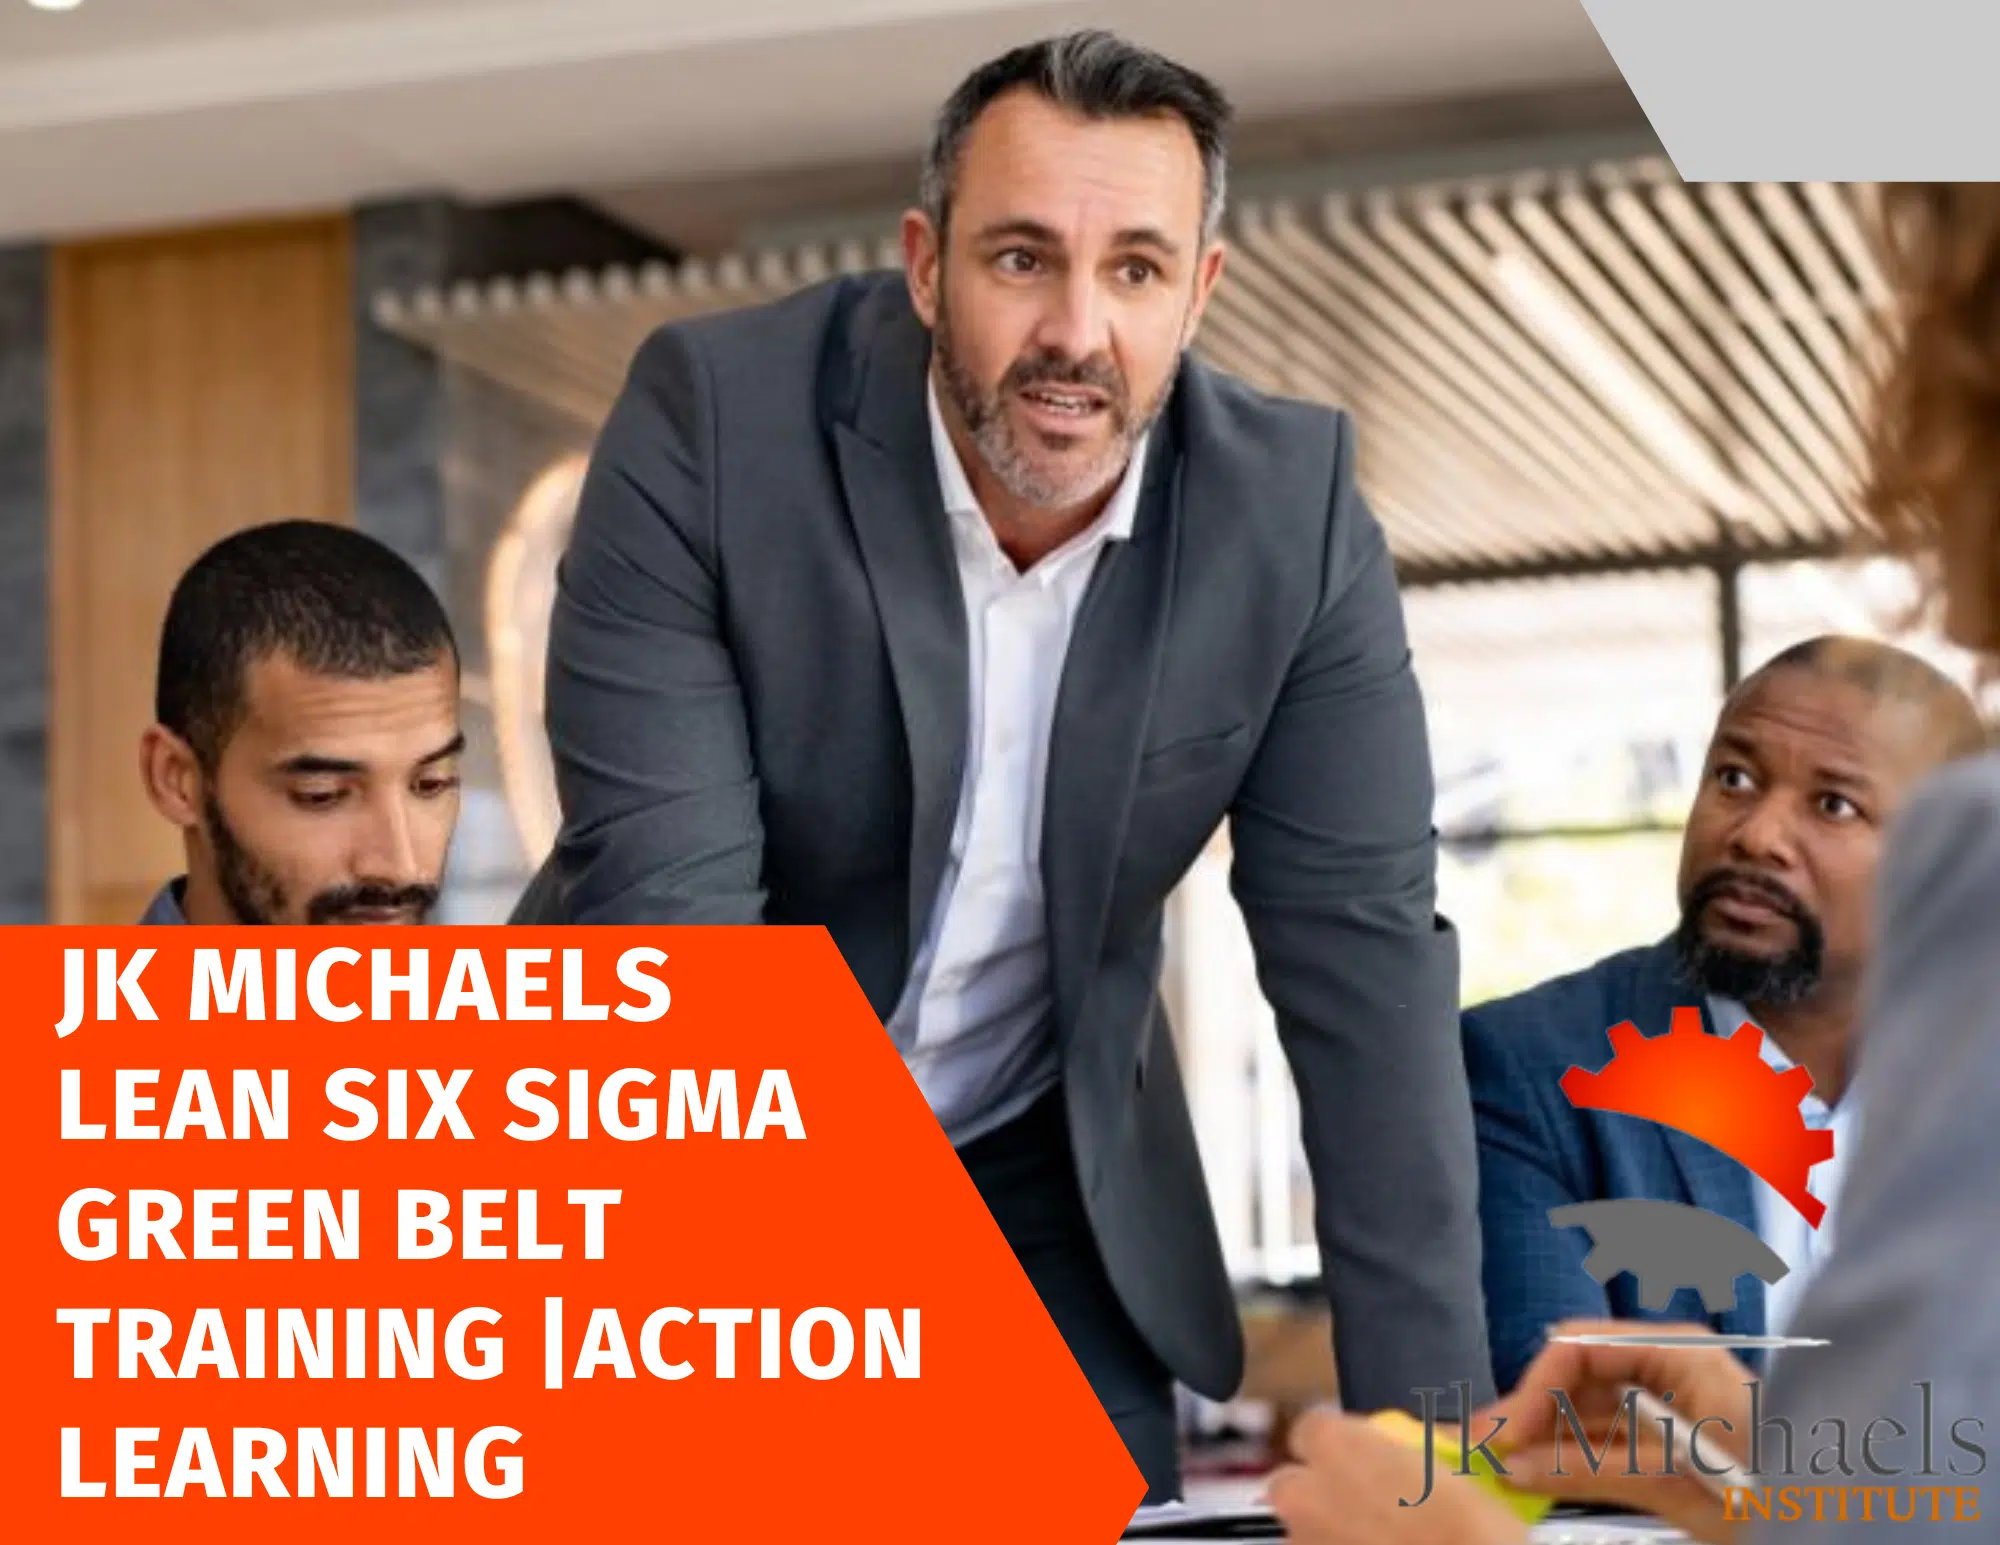 LEAN-SIX-SIGMA-GREEN-BELT-TRAINING-ACTION-LEARNING.png